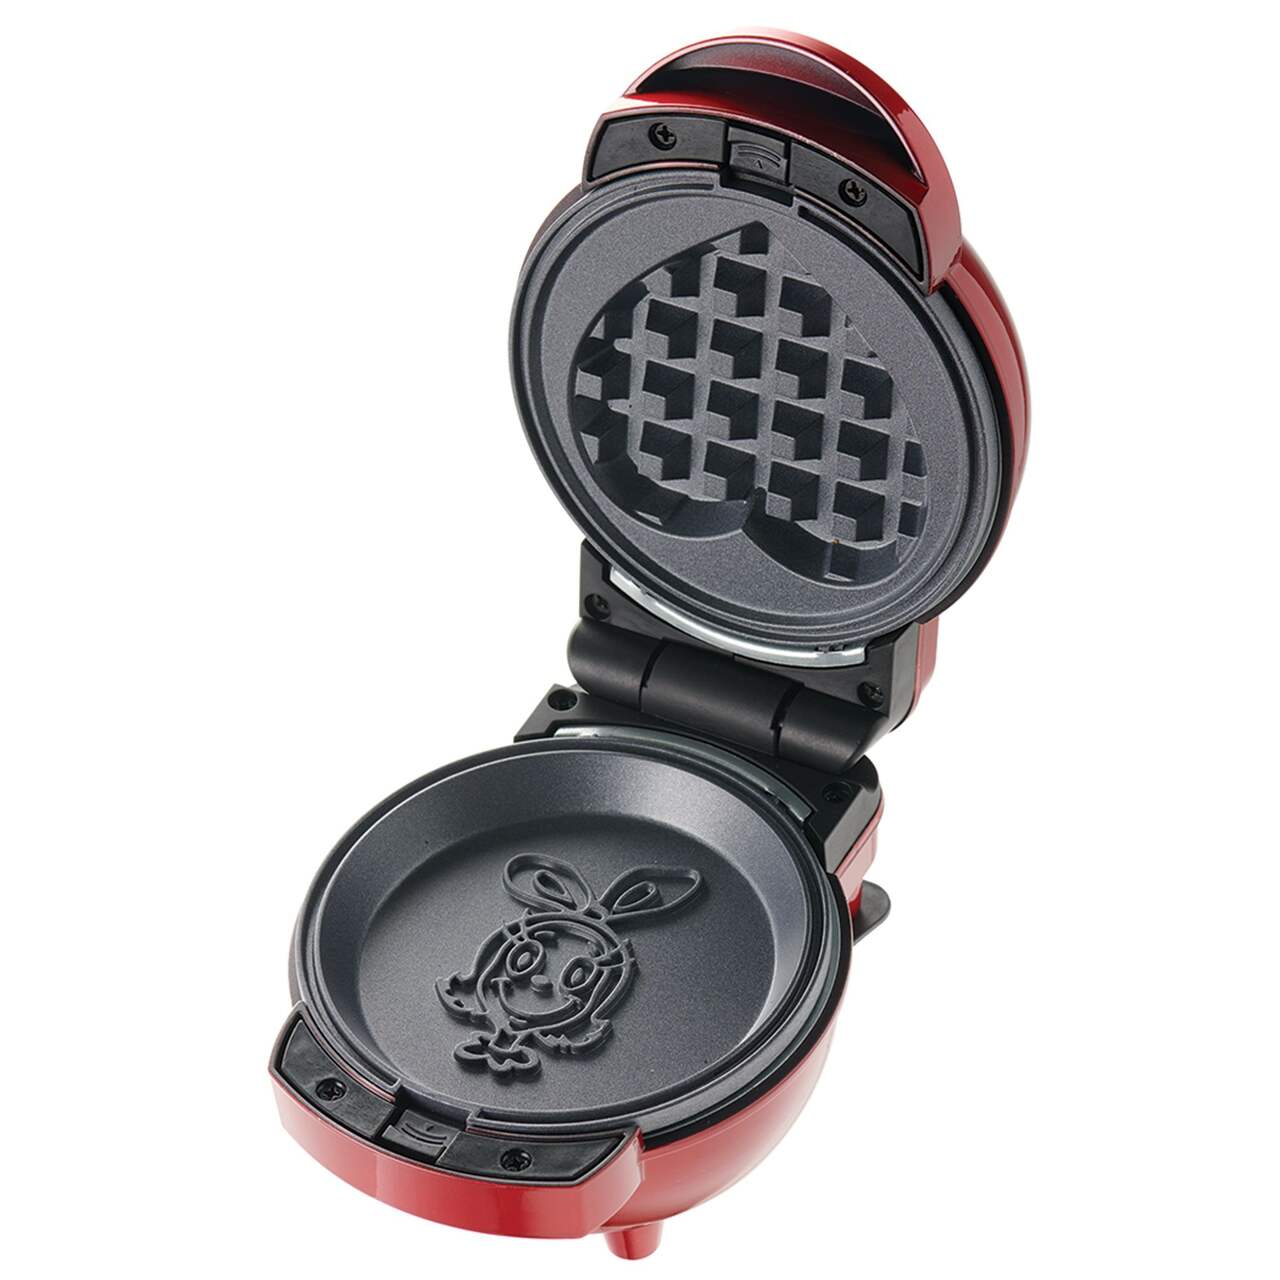 https://media-www.canadiantire.ca/product/living/kitchen/kitchen-appliances/4991124/grinch-waffle-maker-and-griddle-b1c31918-3234-4a9e-8137-f3e006b1d2d6-jpgrendition.jpg?imdensity=1&imwidth=1244&impolicy=mZoom